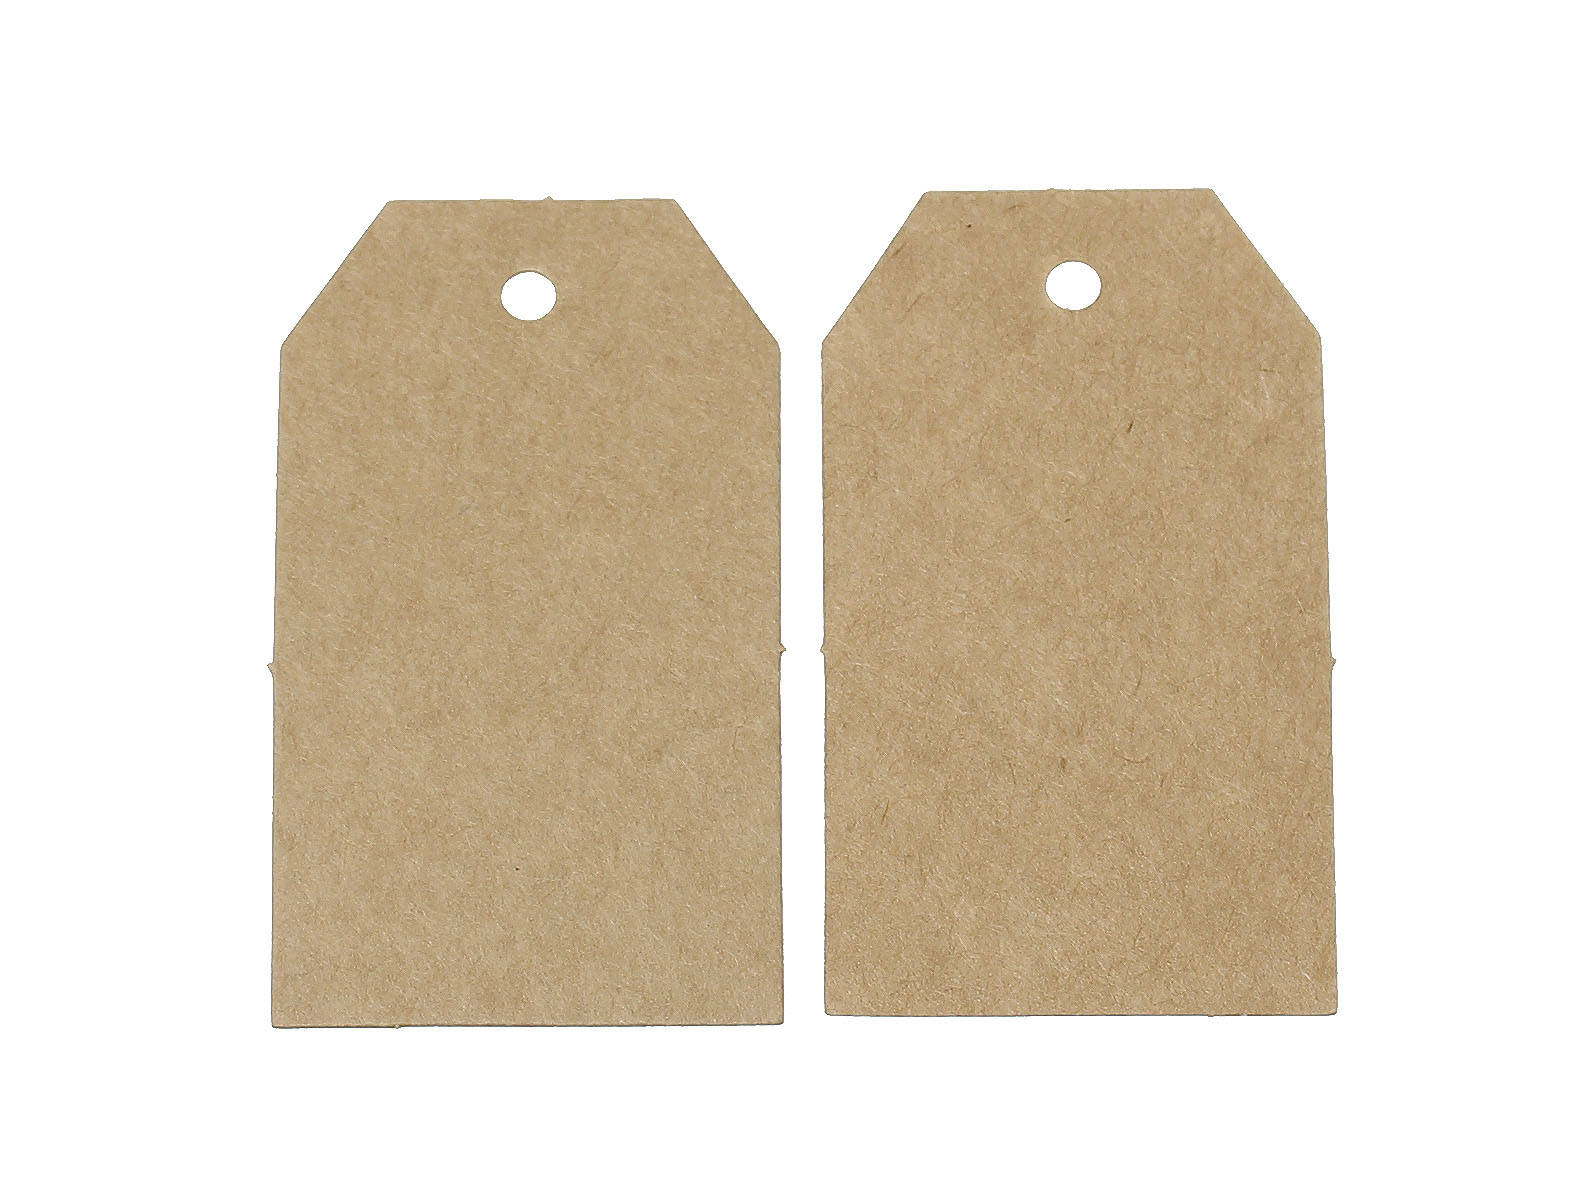 Polygon rectangle gift tags - blank kraft paper tags - Set of 10 or 50